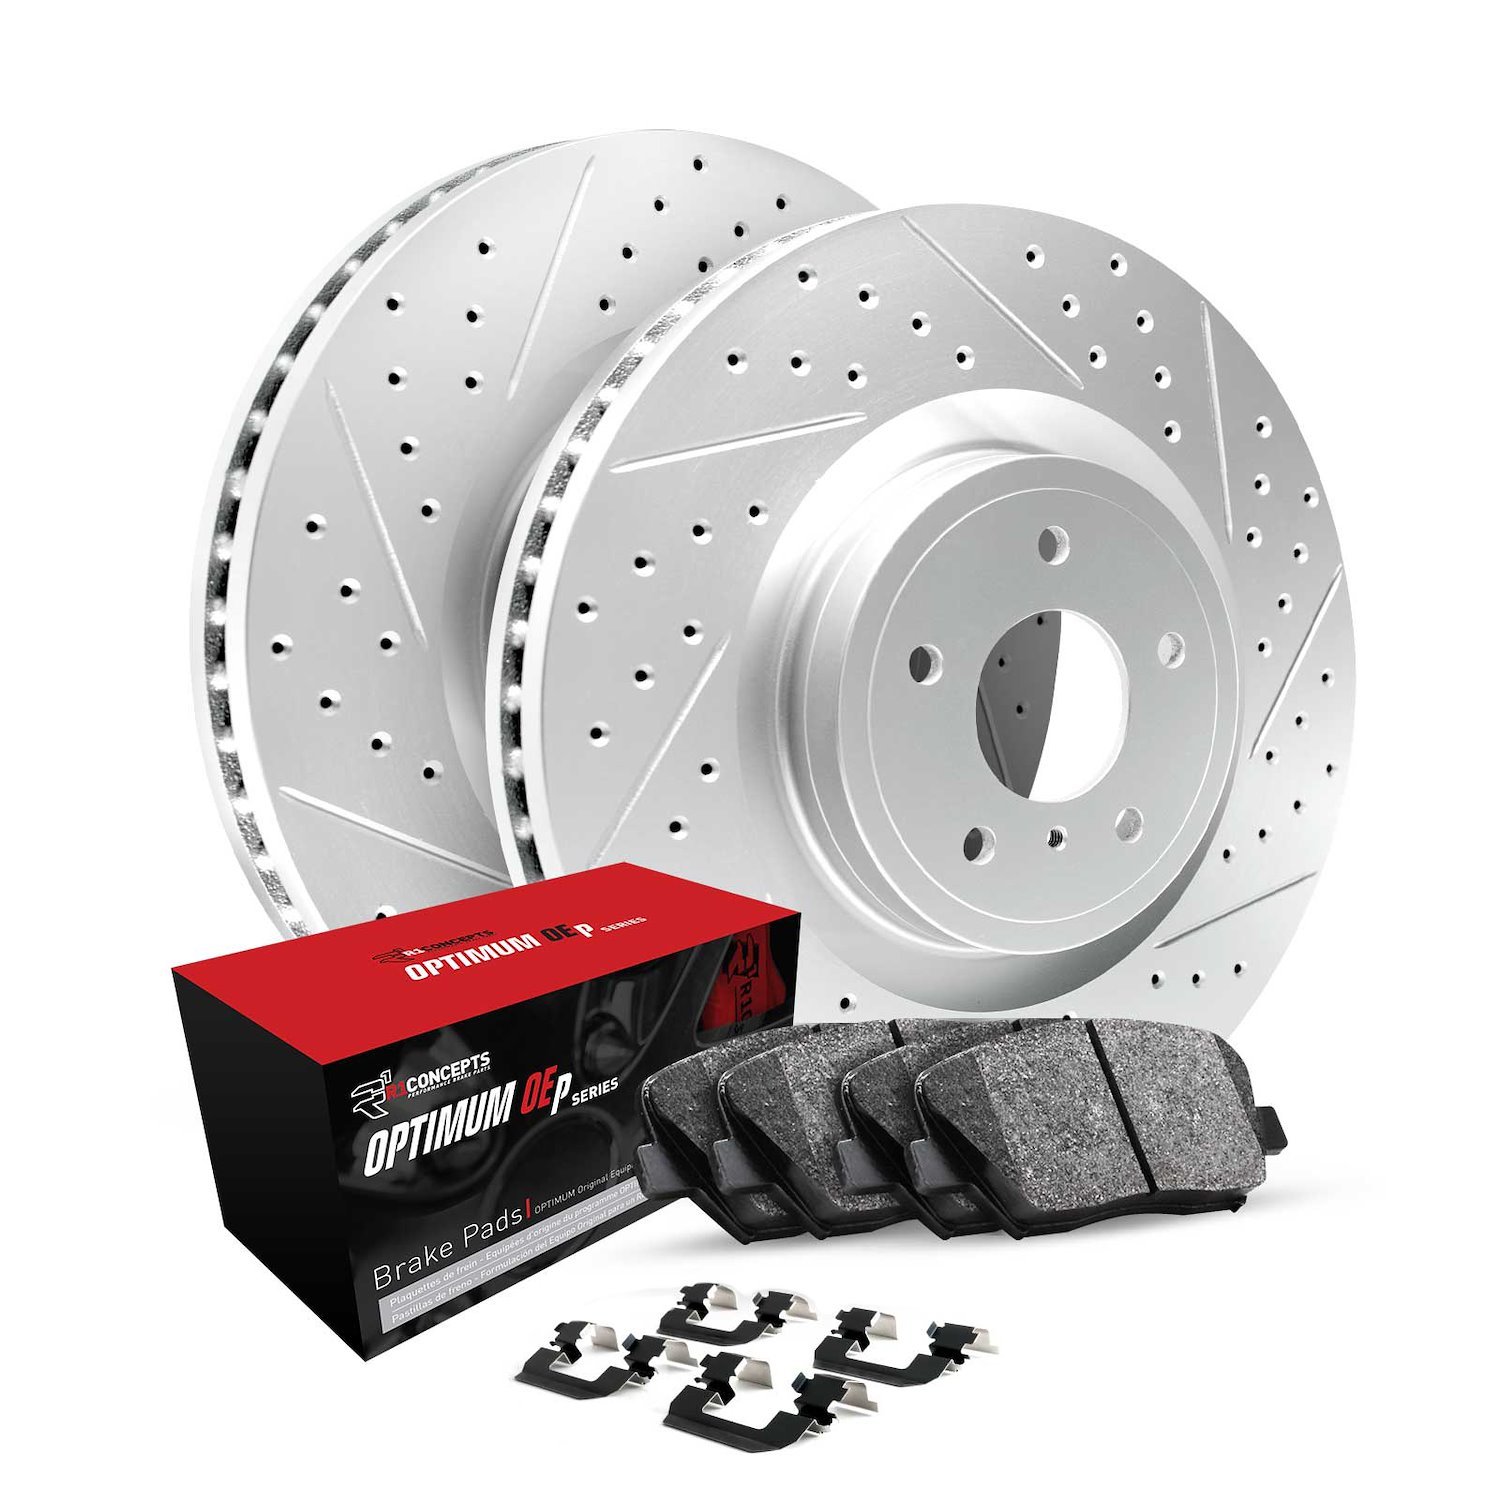 GEO-Carbon Drilled & Slotted Brake Rotor Set w/Optimum OE Pads & Hardware, 2009-2013 Fits Multiple Makes/Models